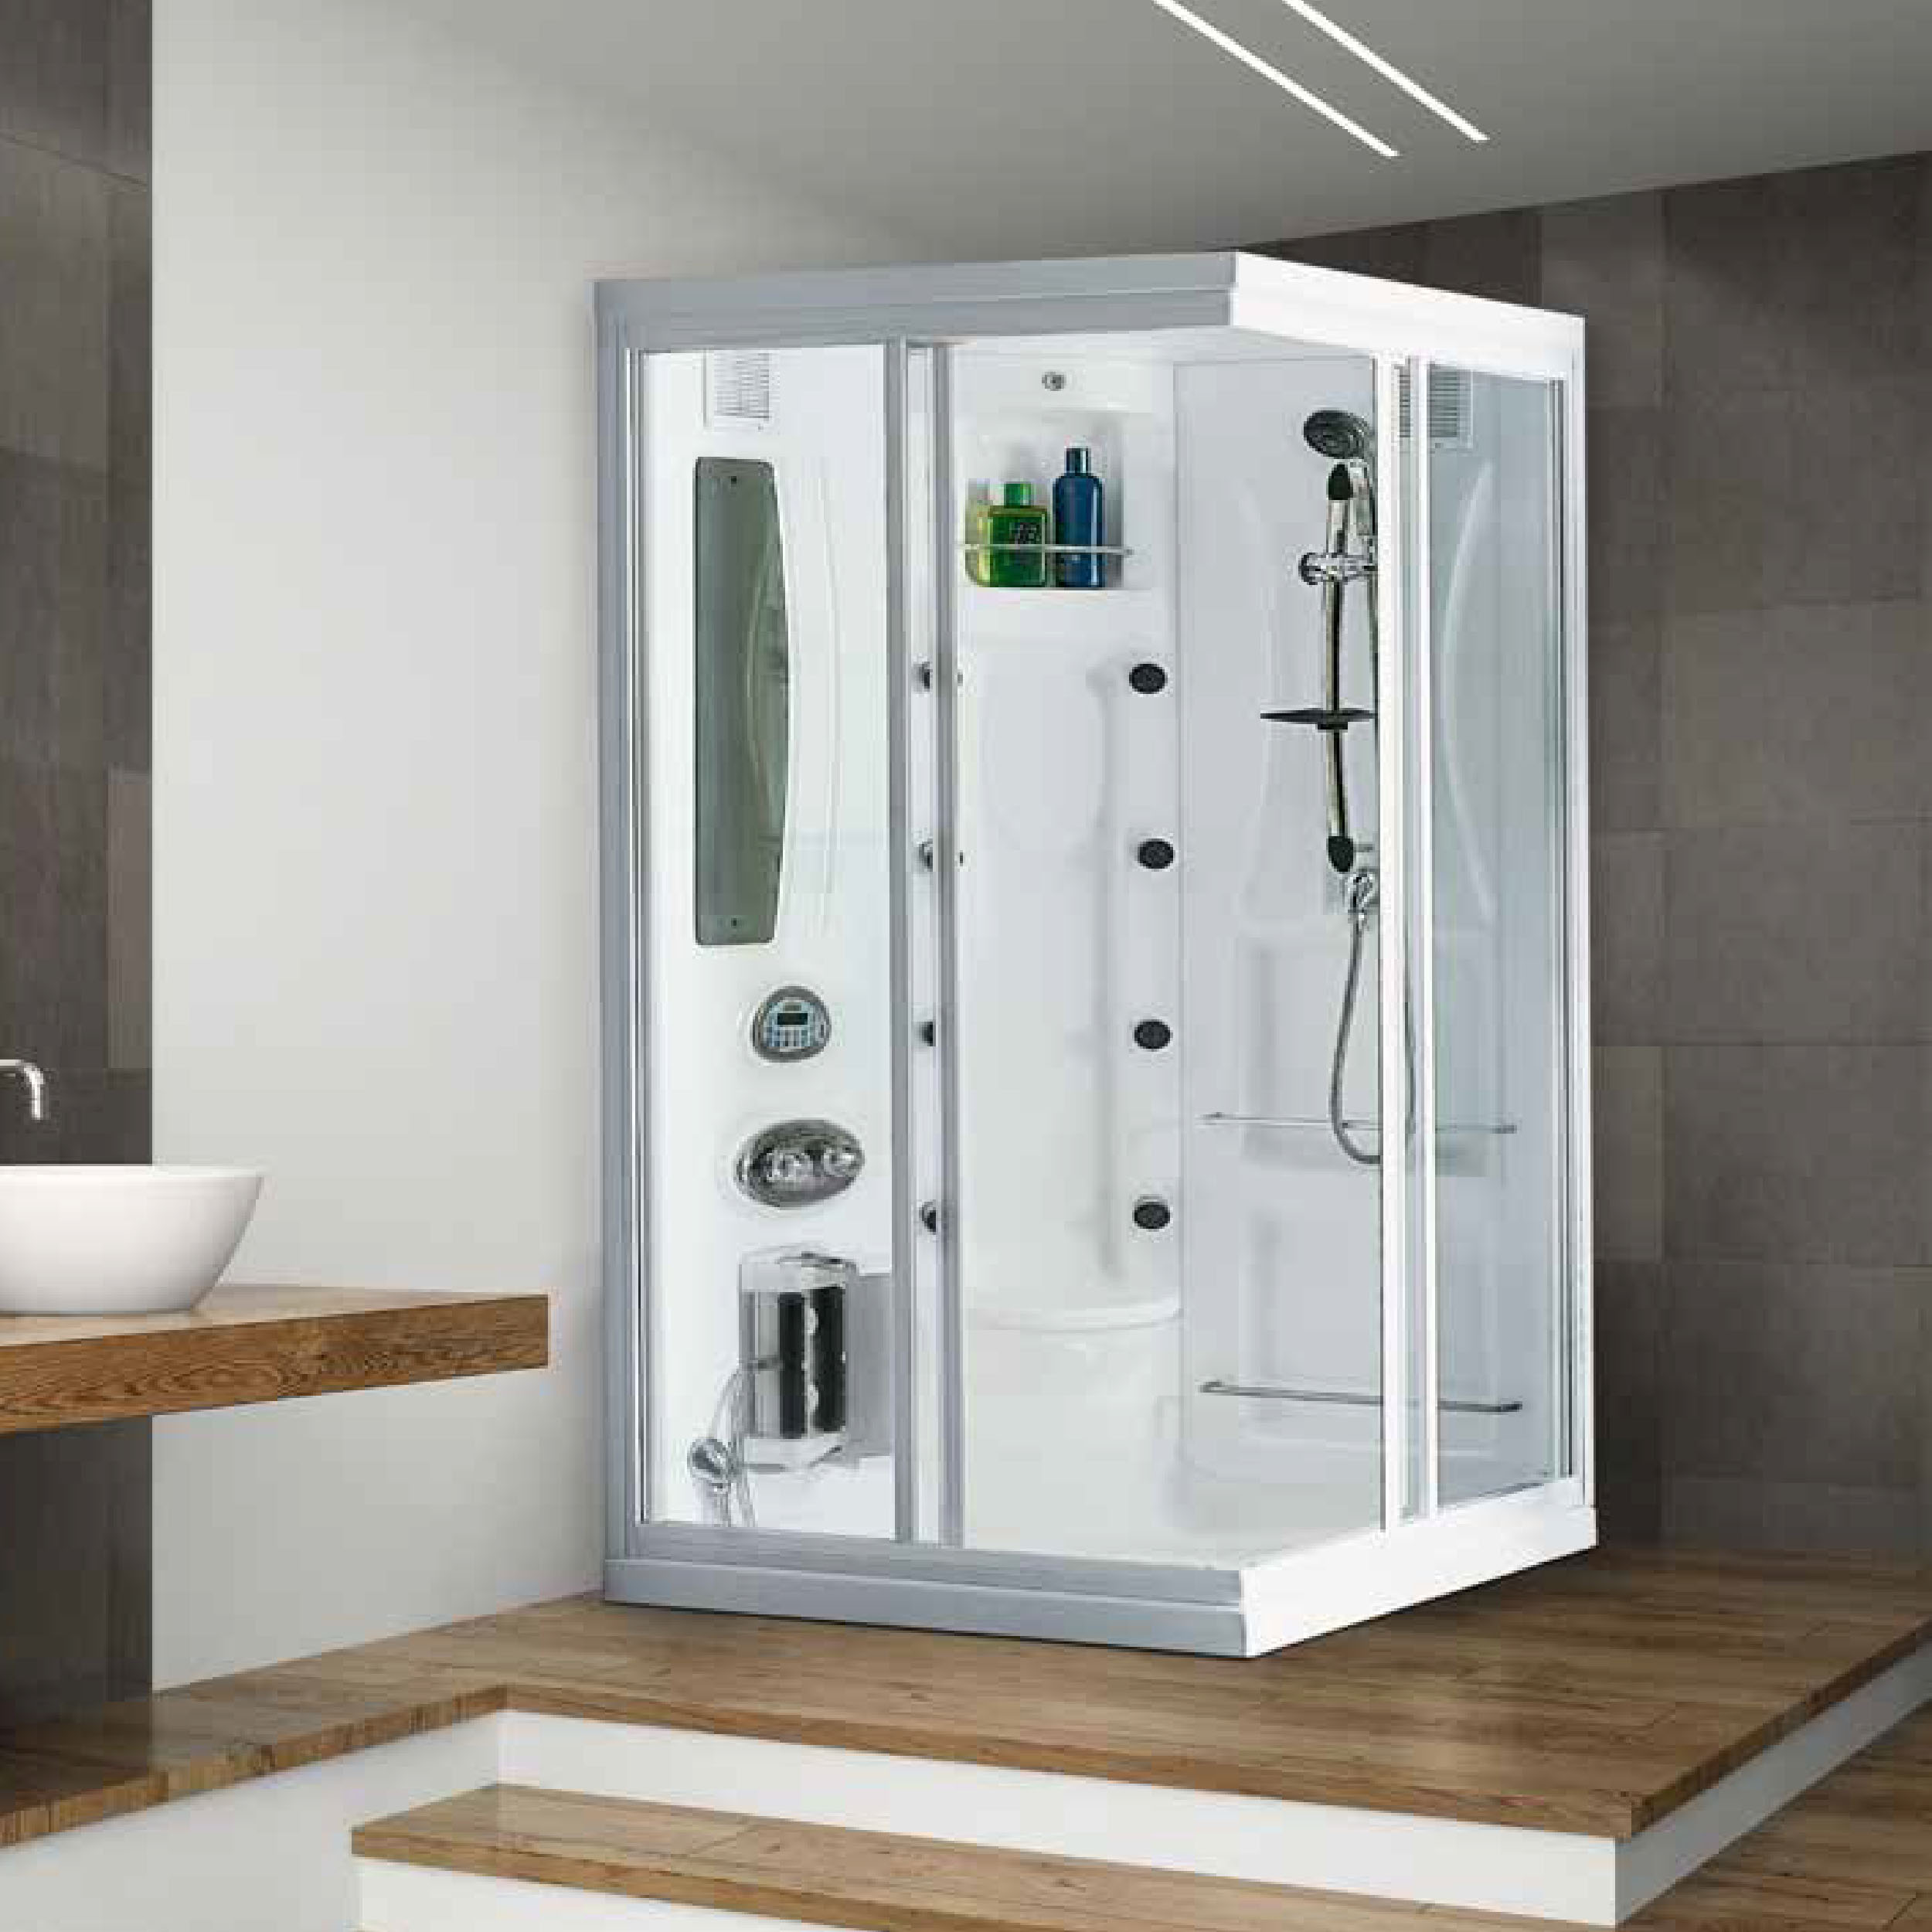 Read more about the article Advantages of Sauna Bath, and why you must add it to bathroom